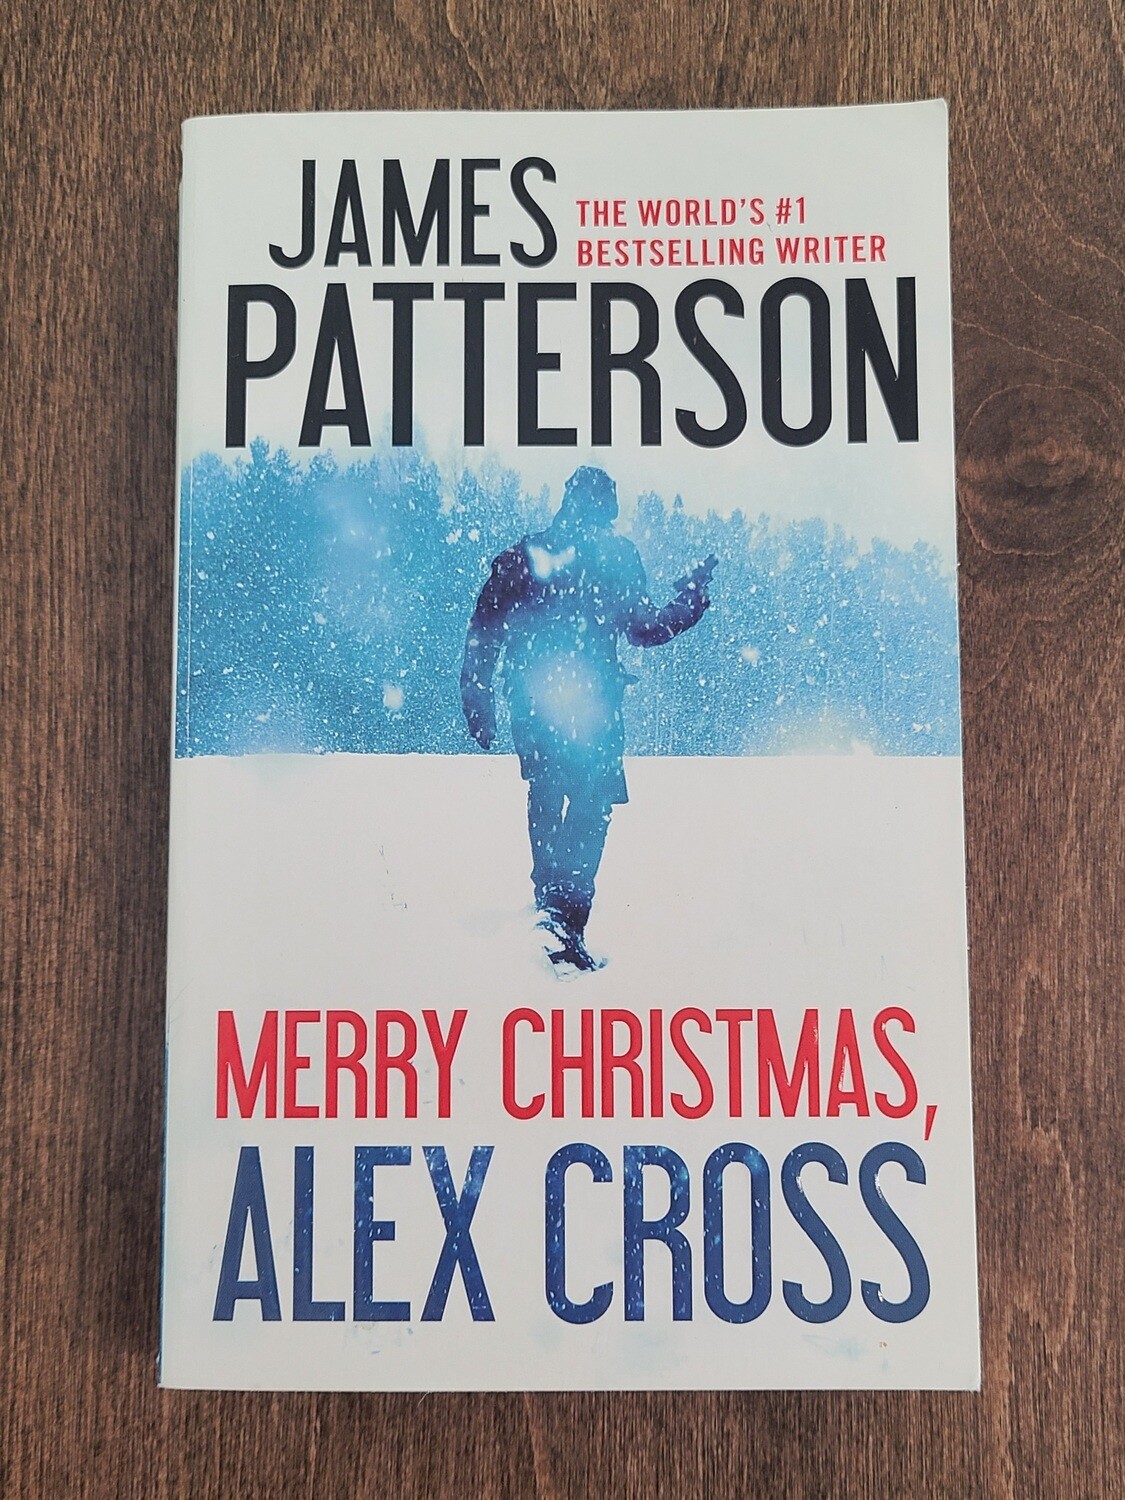 Merry Christmas, Alex Cross by James Patterson - Small Paperback